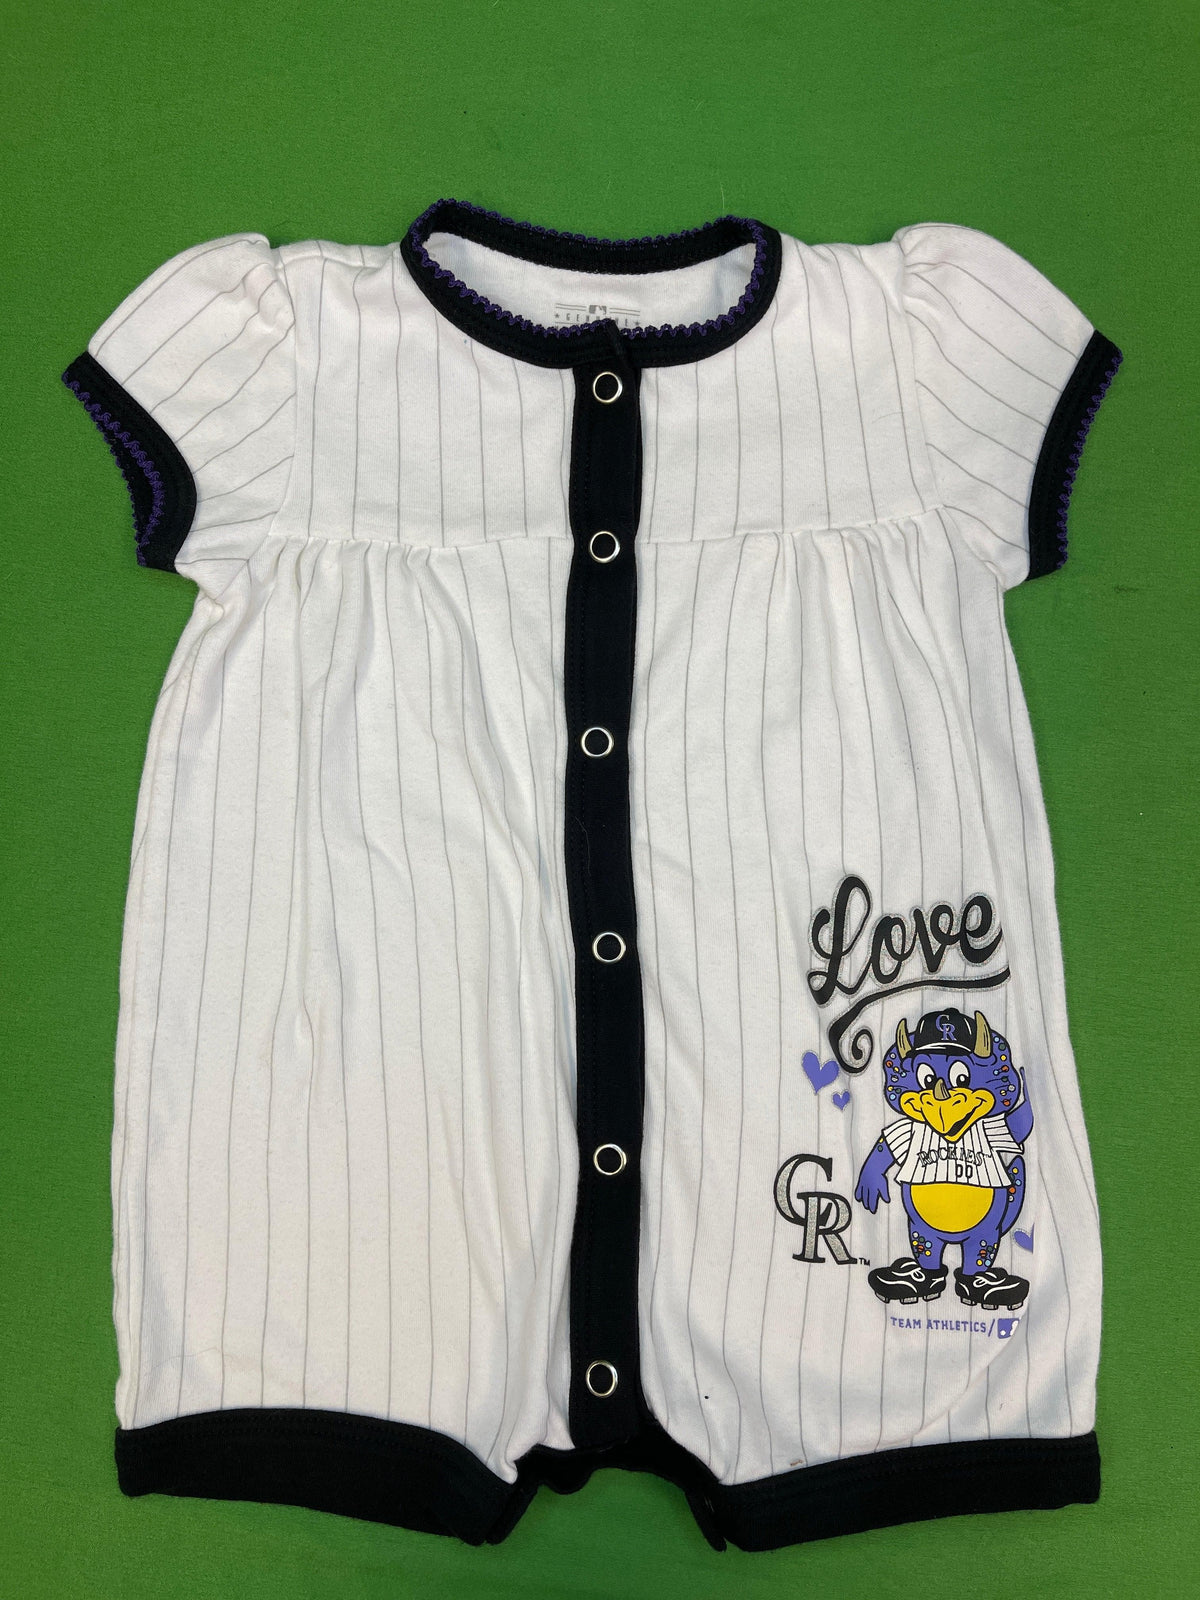 MLB Colorado Rockies Baby Girl Outfit Toddler 18 months